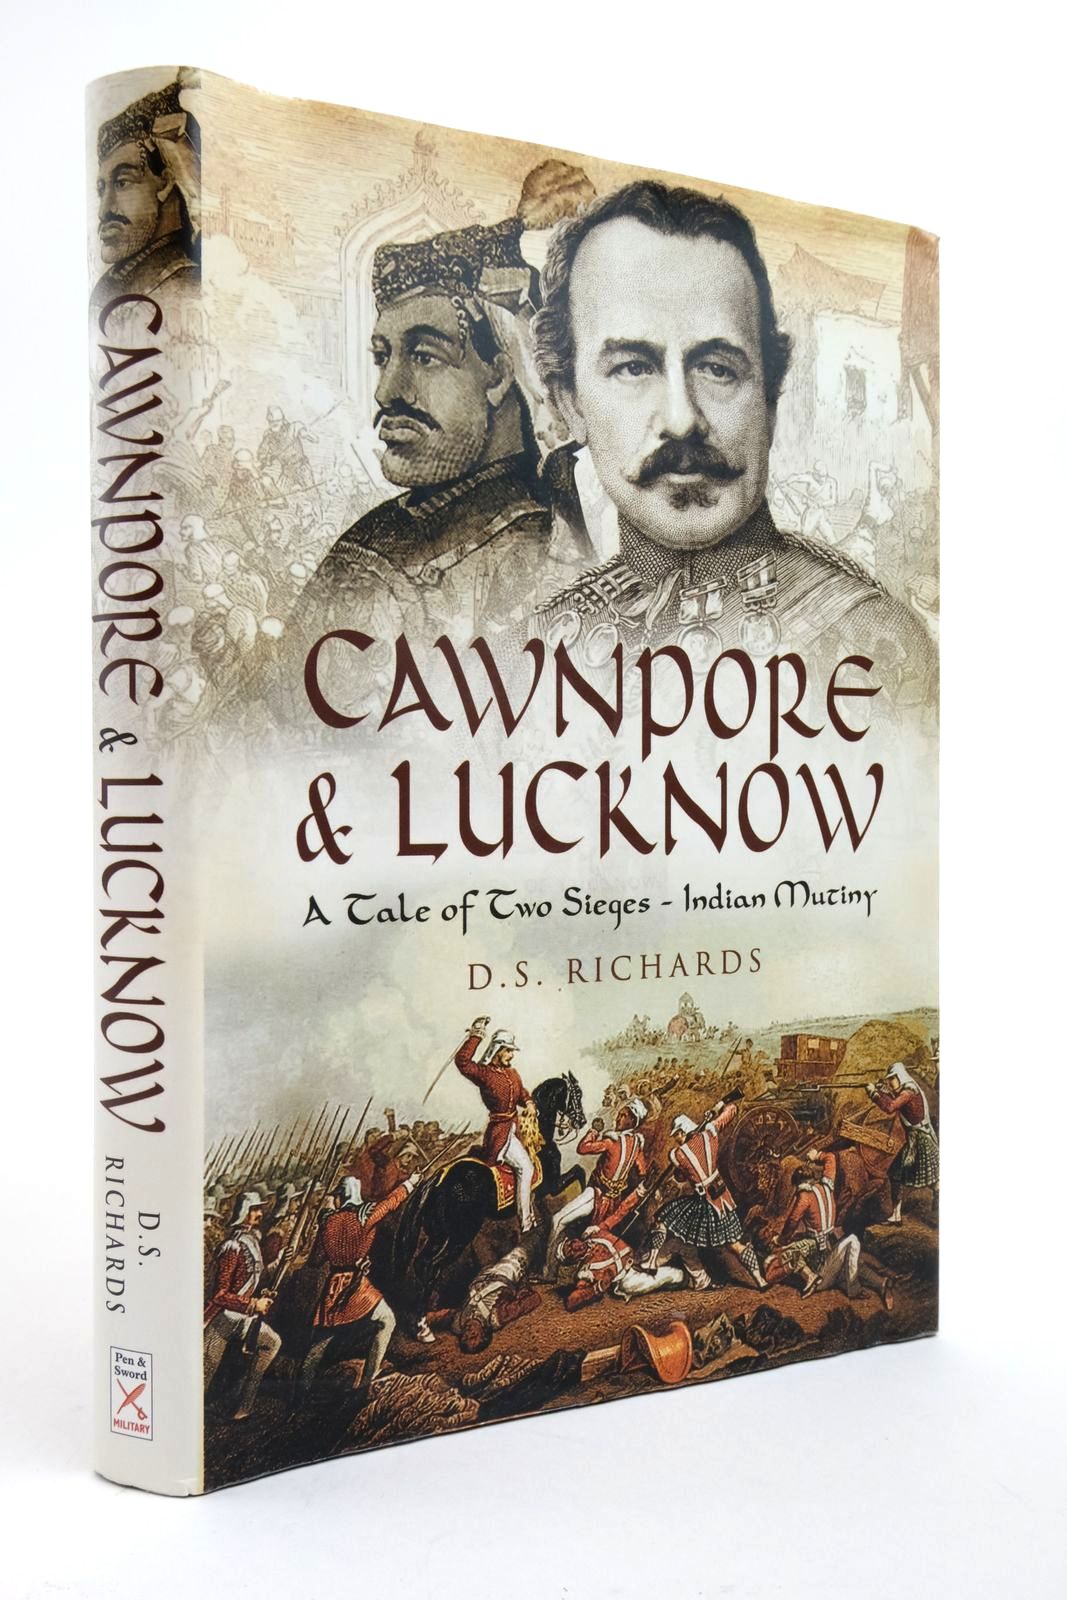 Photo of CAWNPORE AND LUCKNOW: A TALE OF TWO SIEGES written by Richards, D.S. published by Pen & Sword Military (STOCK CODE: 2138540)  for sale by Stella & Rose's Books